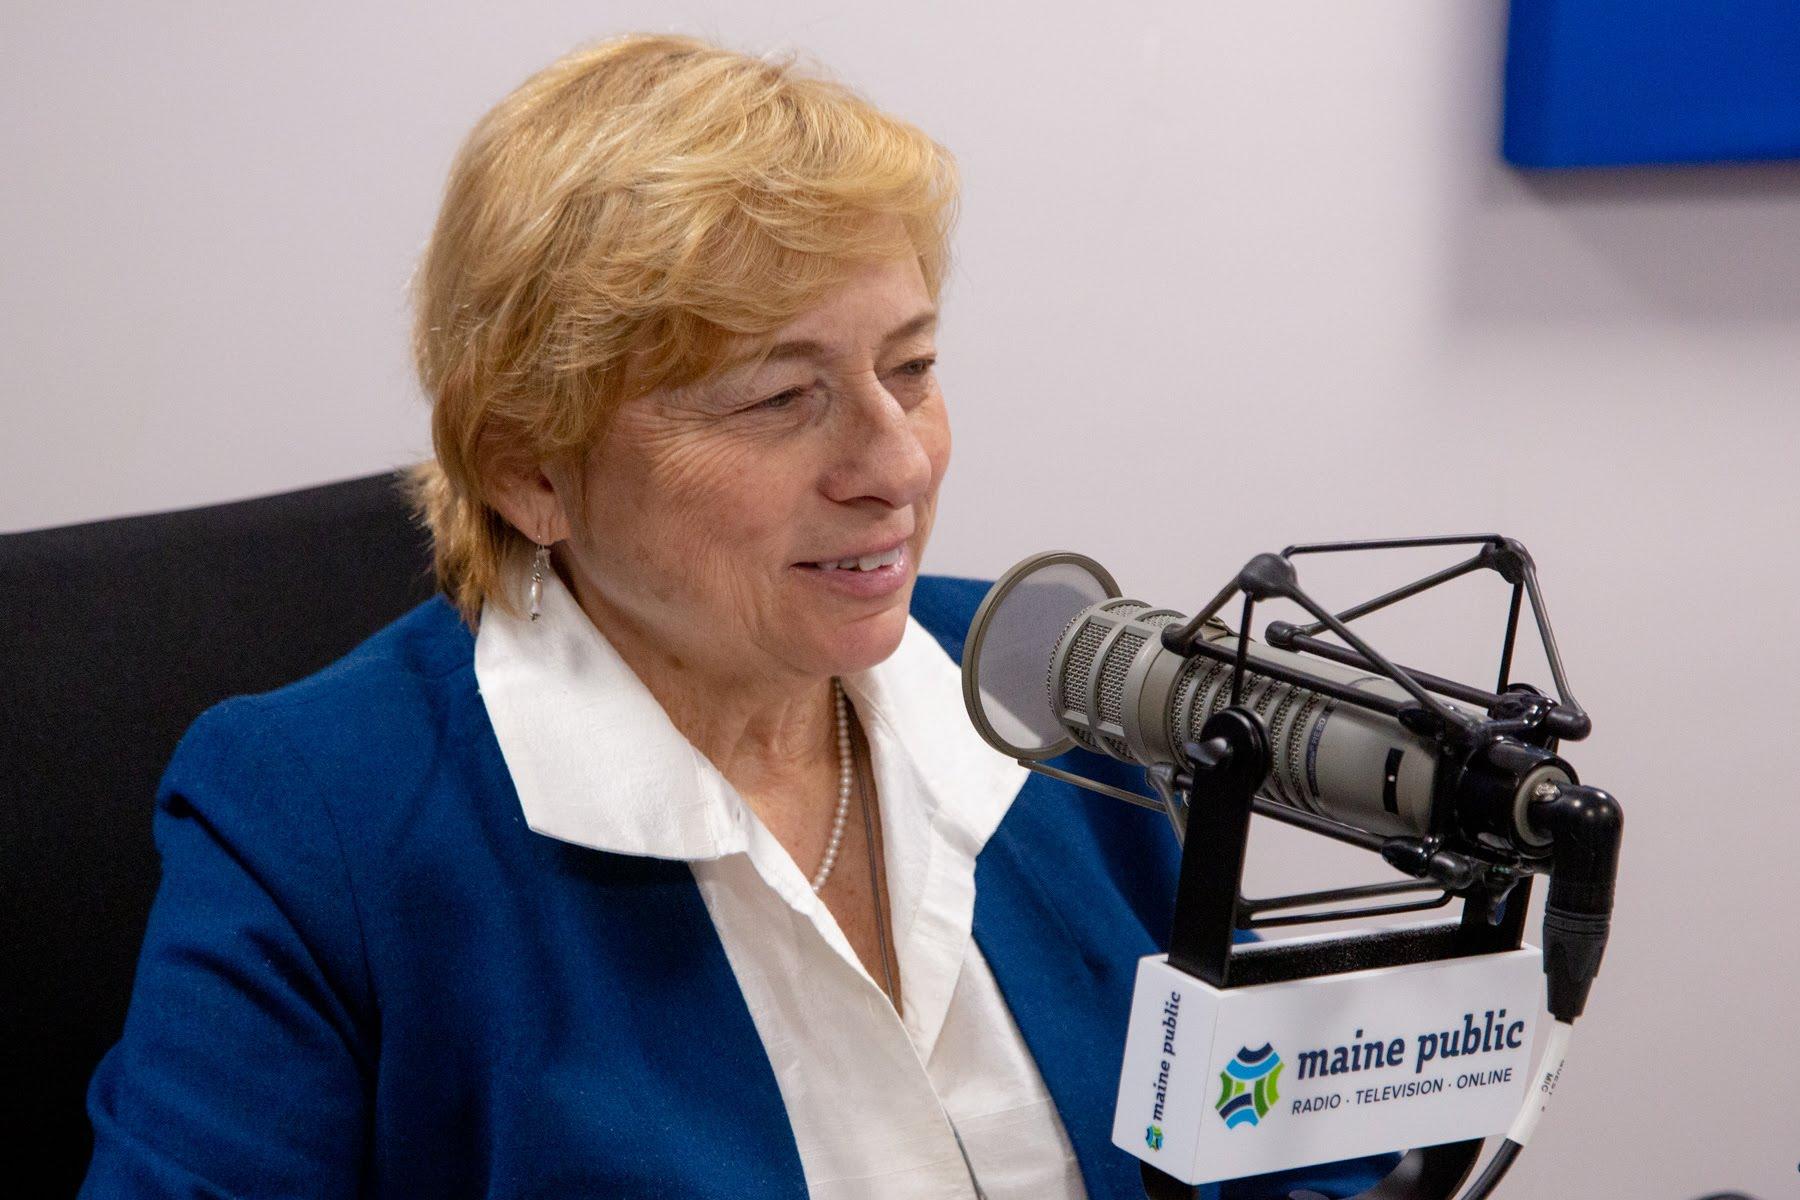 gov-janet-mills-on-maine-calling-what-priorities-and-challenges-does